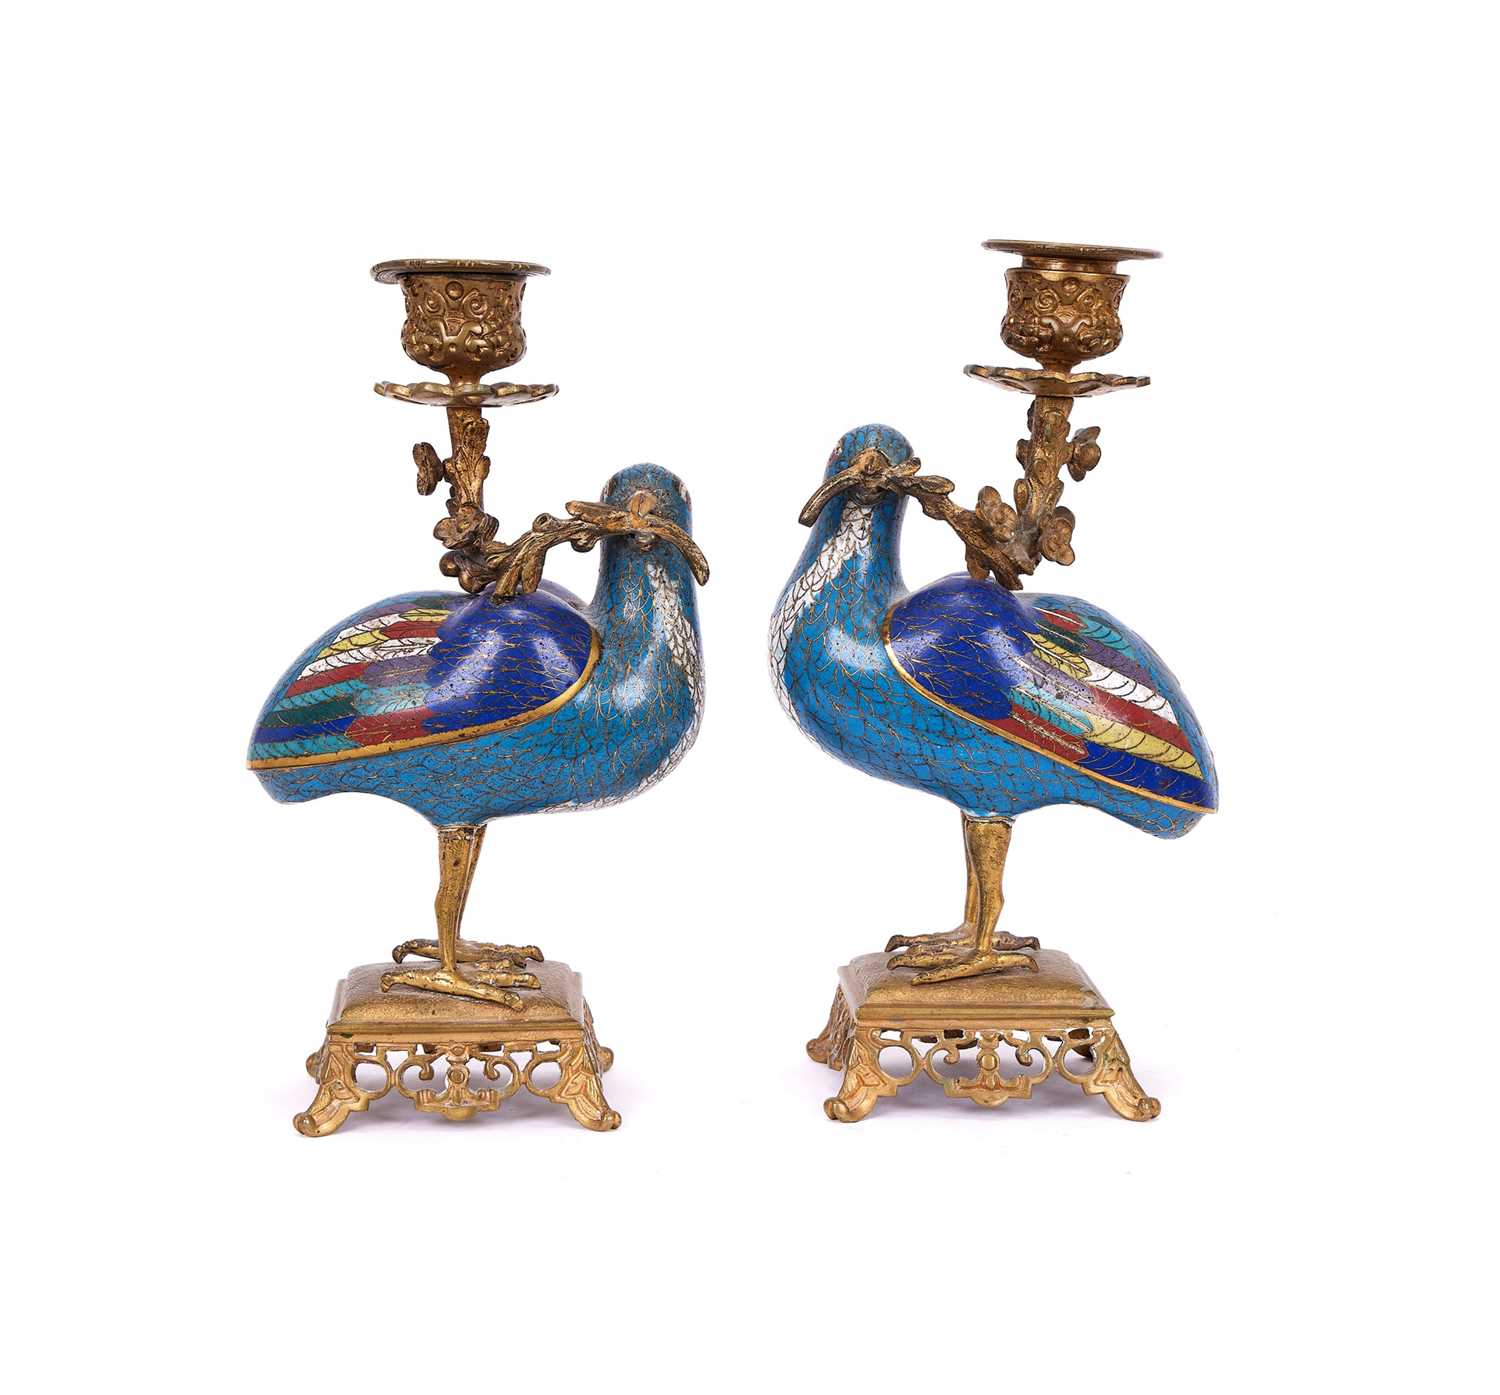 A PAIR OF 19TH CENTURY CHINESE CLOISONNE ENAMEL CANDLESTICKS MODELLED AS DOVES - Image 5 of 6